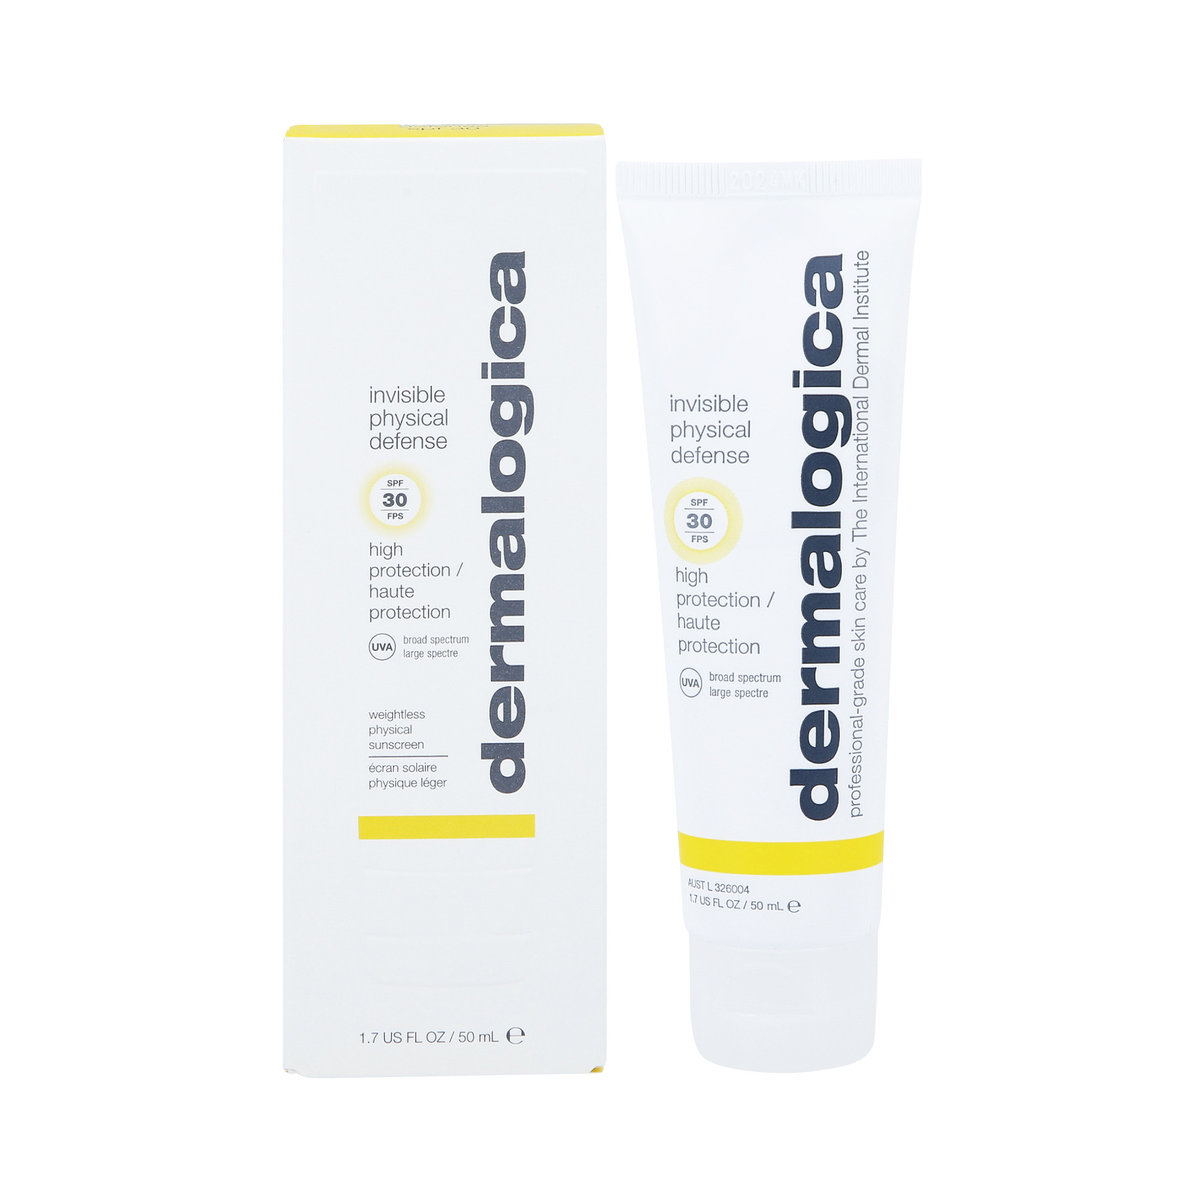 Dermalogica Invisible Physical Defense spf30